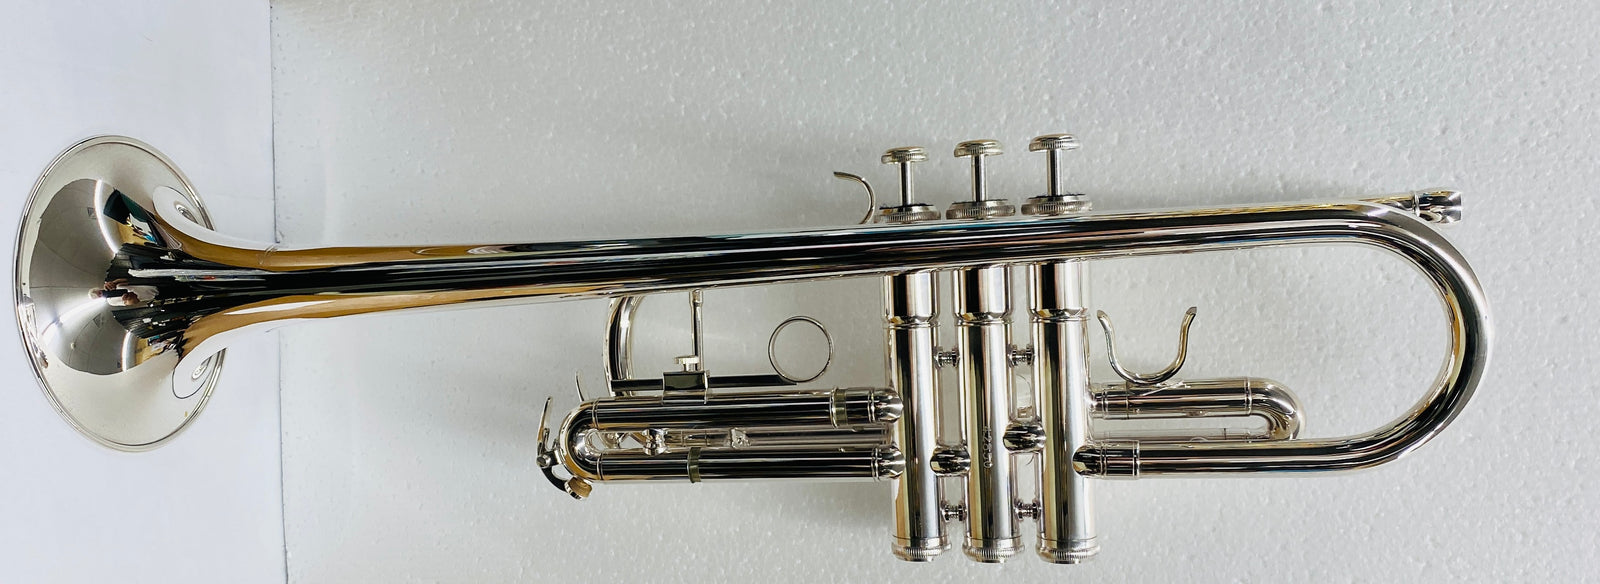 The O'Malley "Chamber Wind" C Trumpet